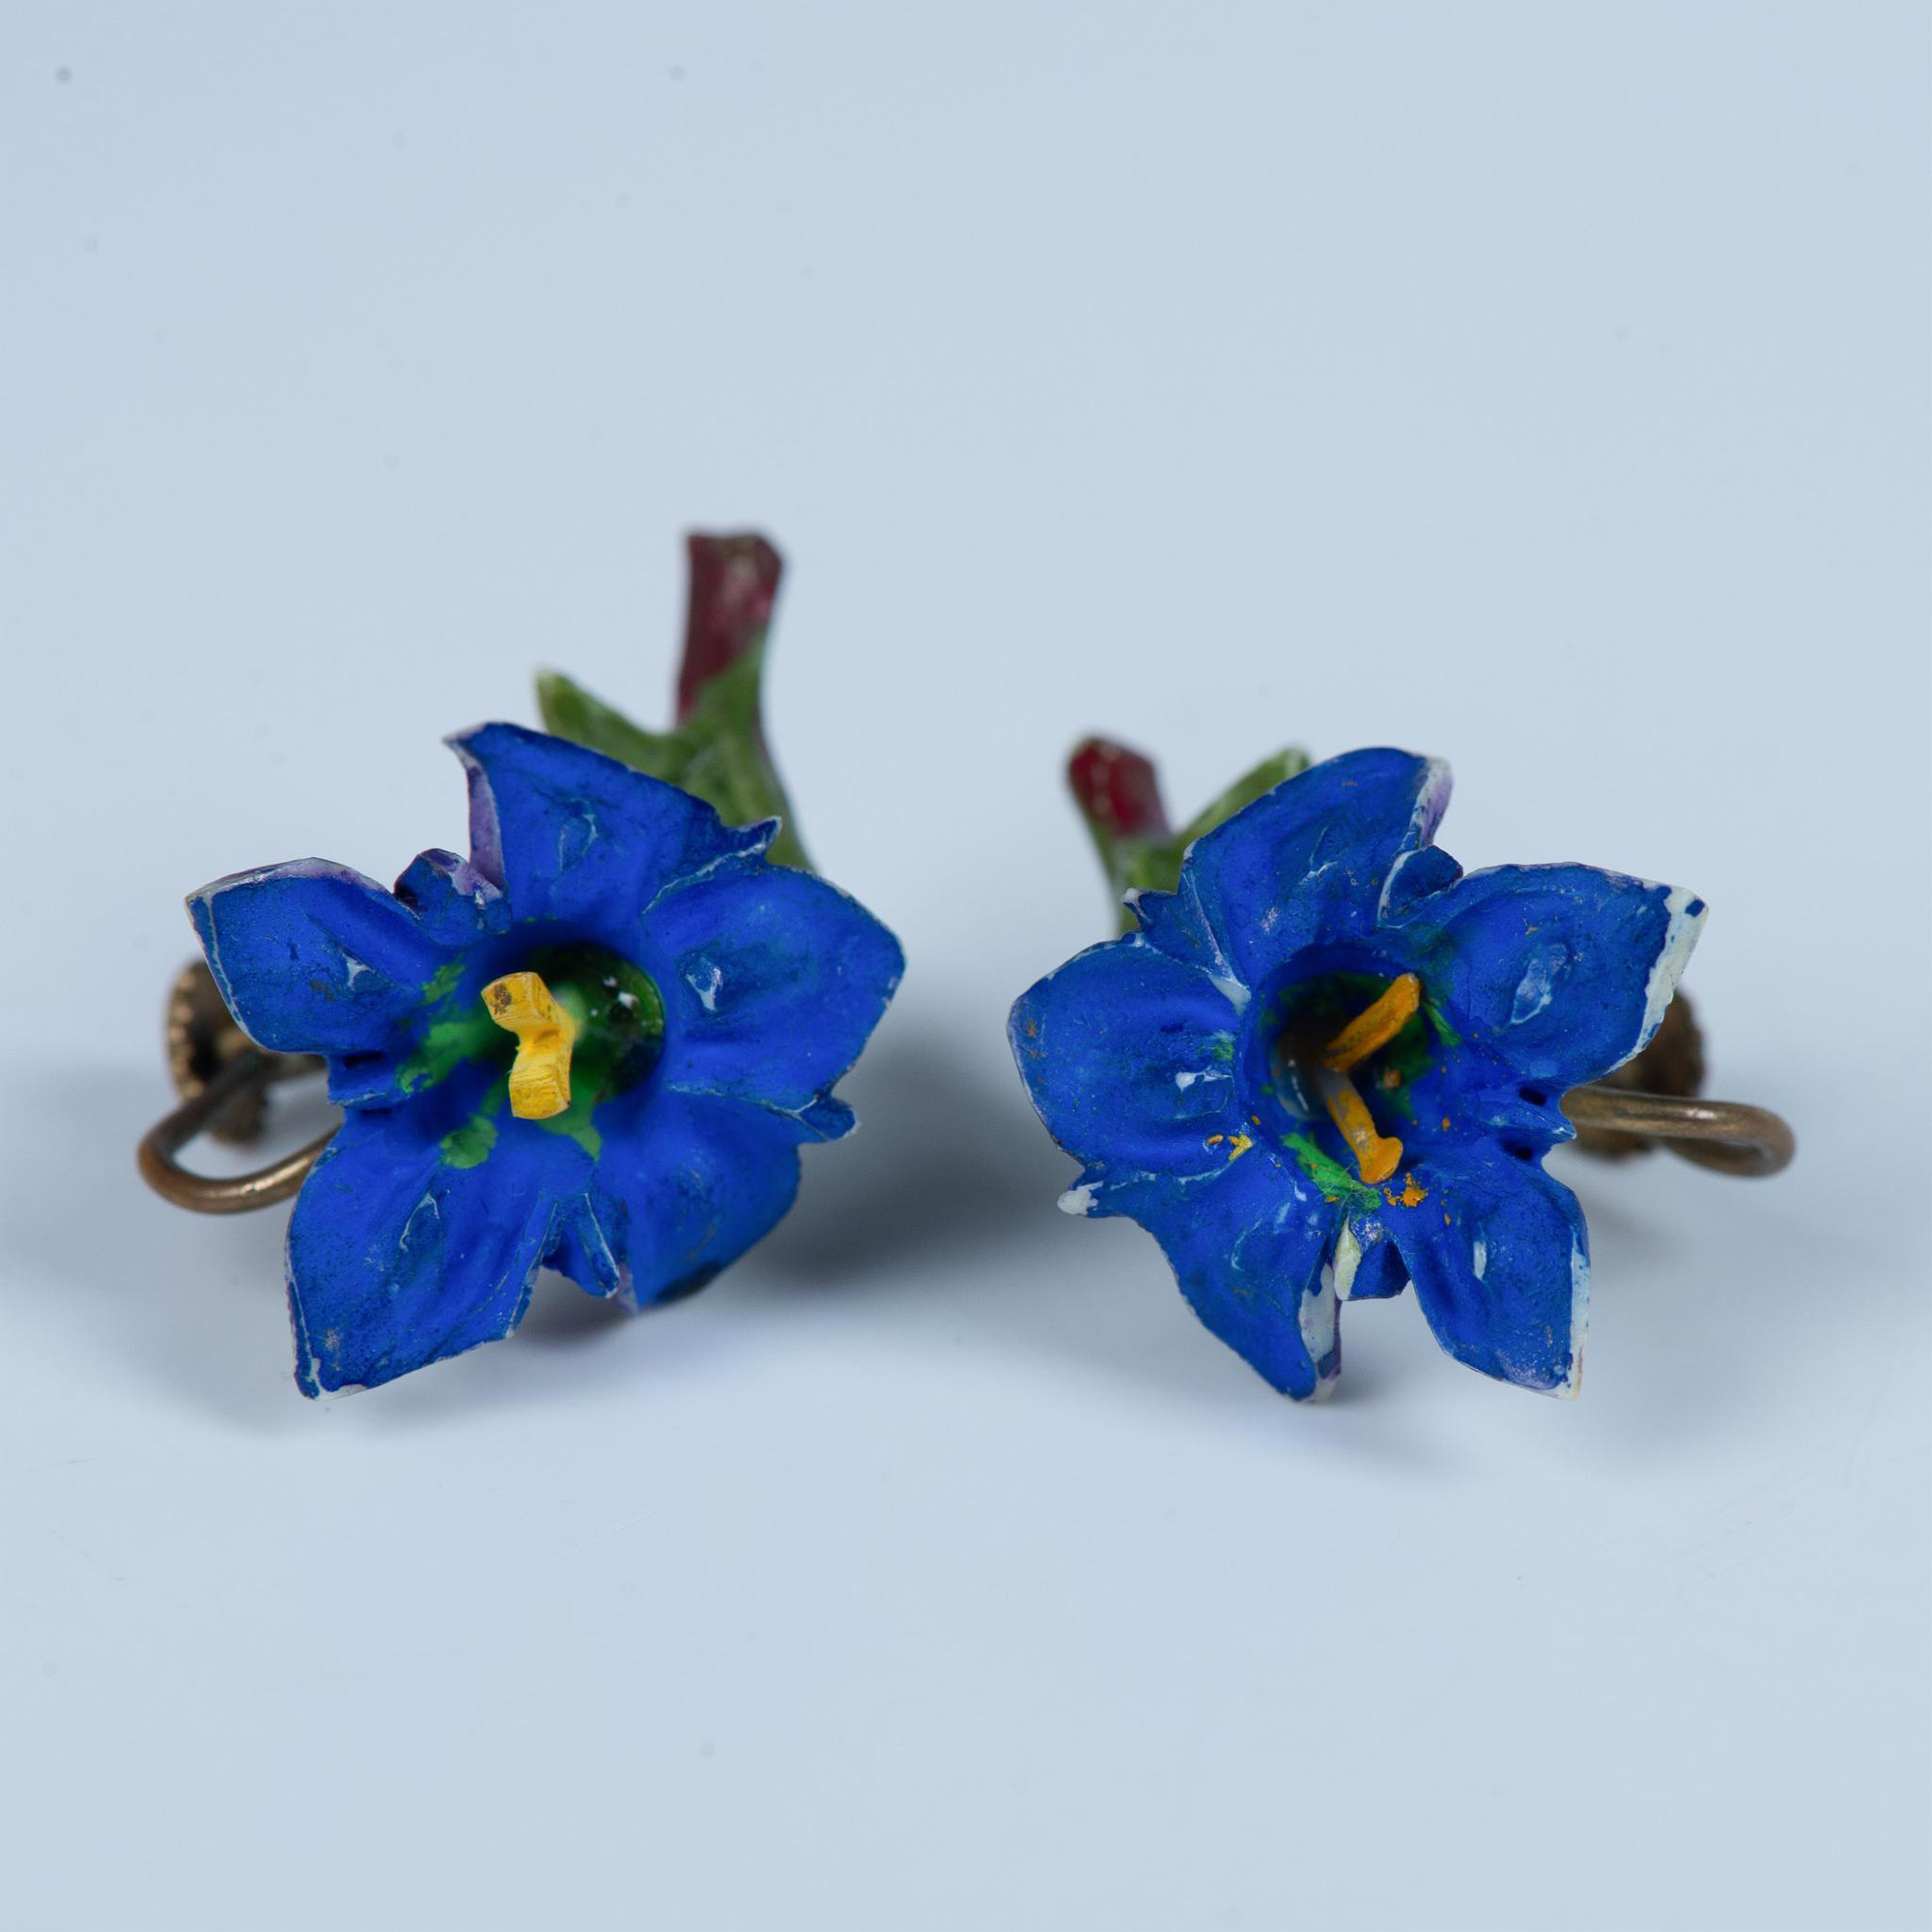 2pc 1940's Blue Flower Screw-Back Earrings and Brooch - Image 4 of 4